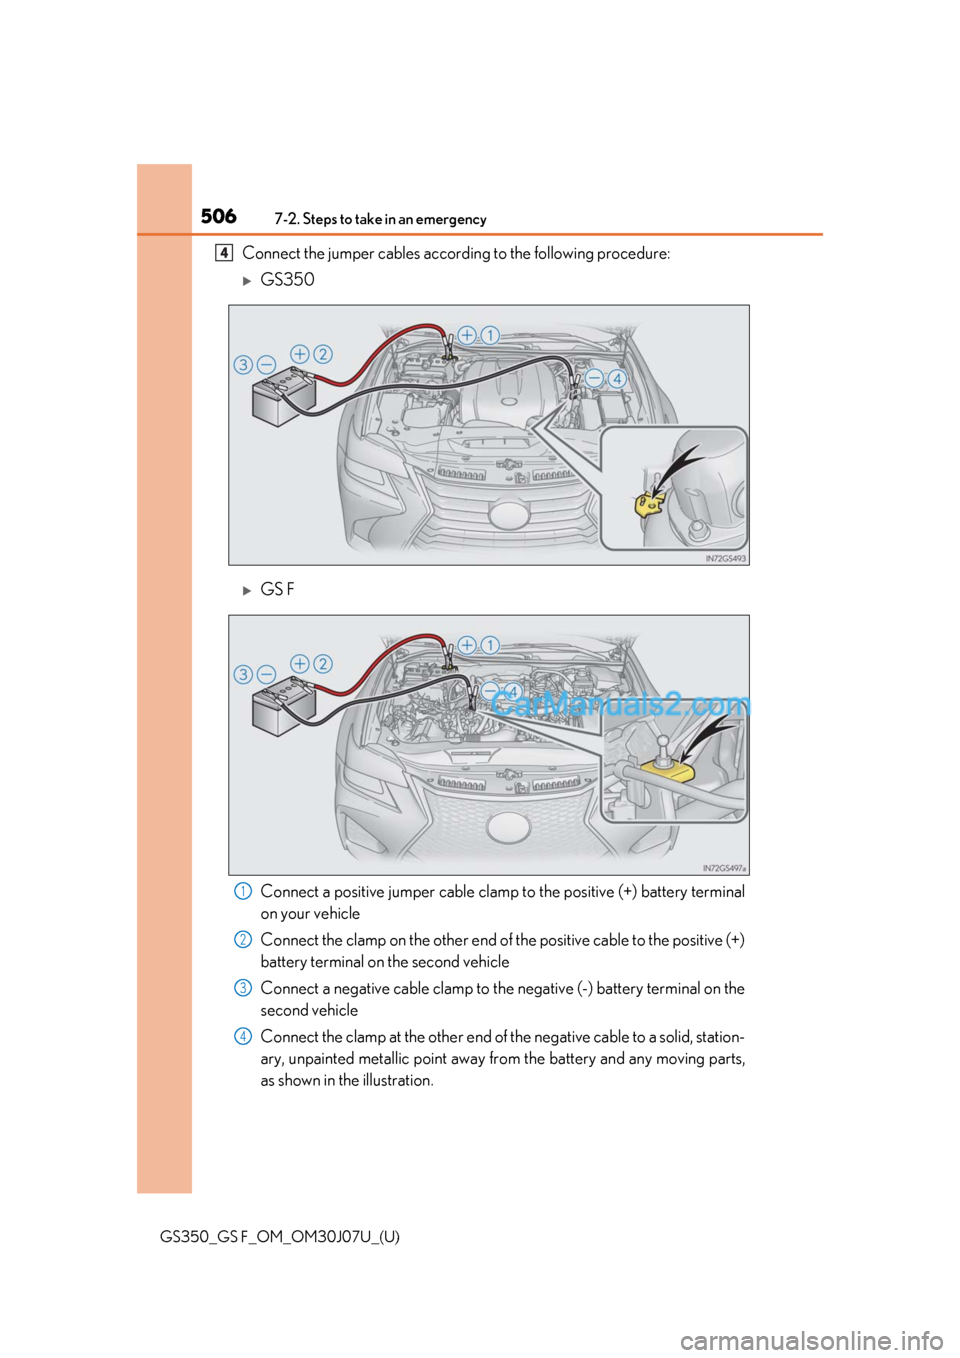 Lexus GS F 2020  Owners Manuals 5067-2. Steps to take in an emergency
GS350_GS F_OM_OM30J07U_(U)
Connect the jumper cables according to the following procedure:
GS350
GS F
Connect a positive jumper cable clamp to the positive 